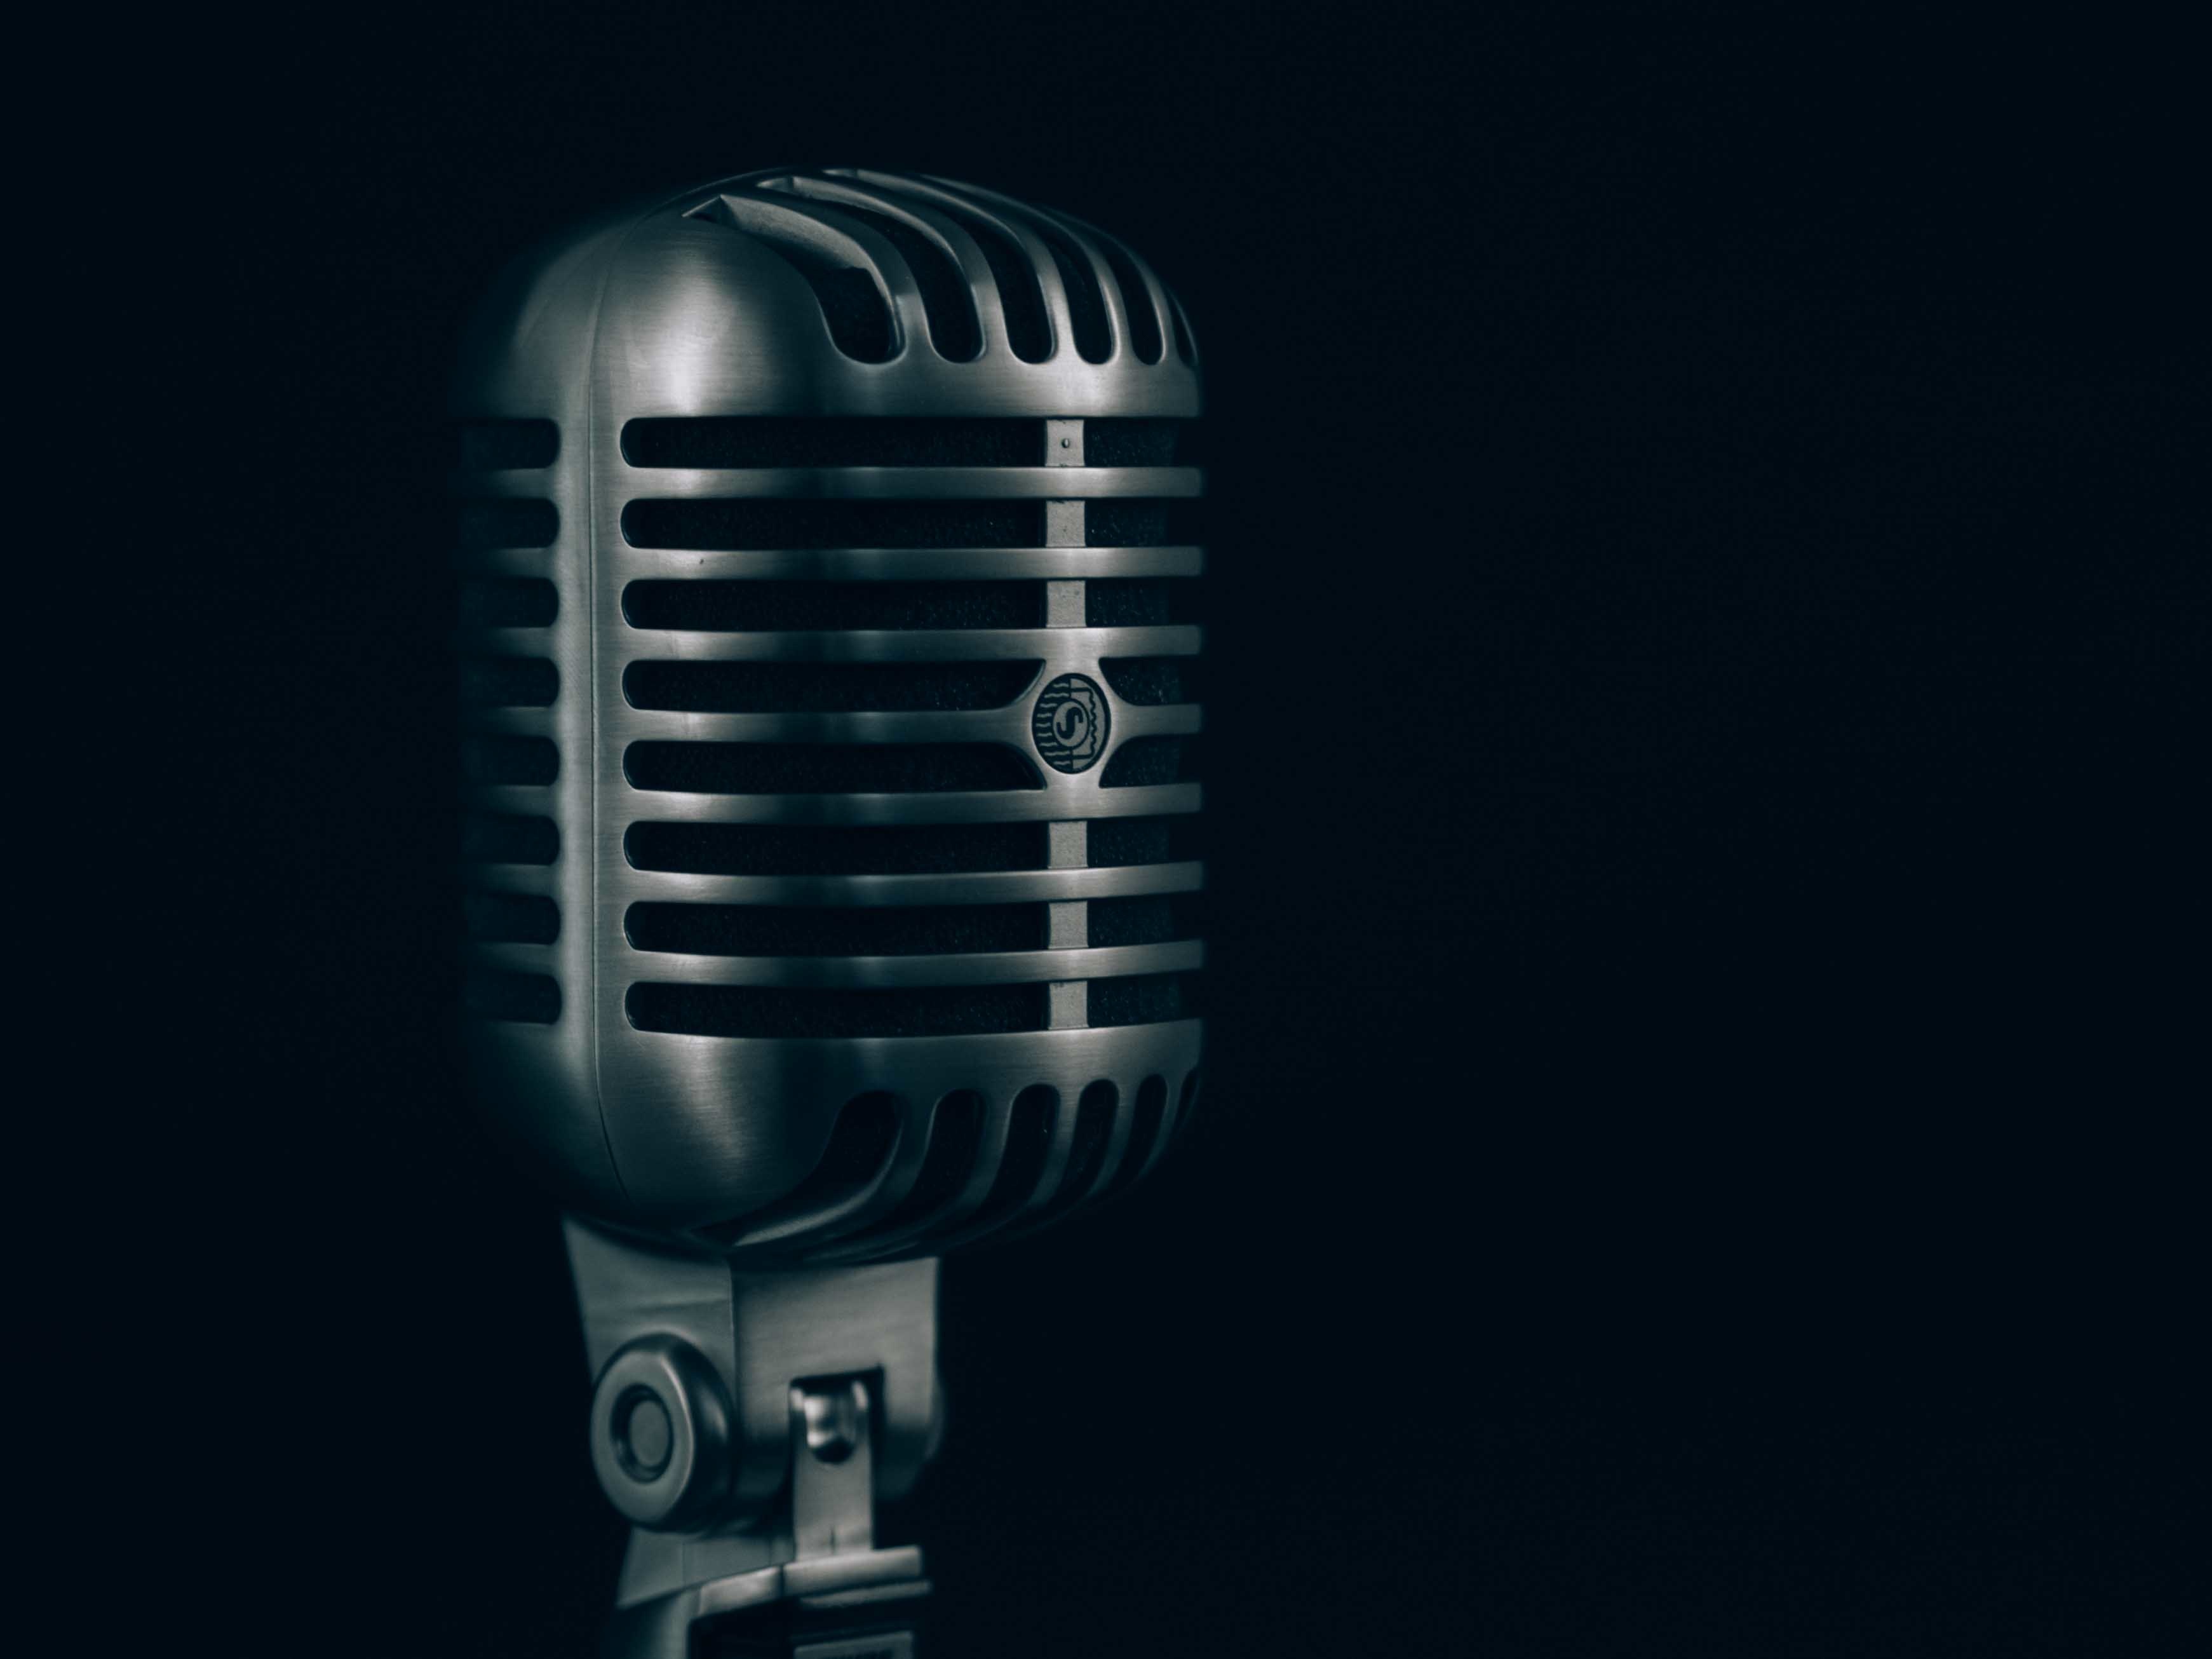 Wallpapers music black and white microphone on the desktop